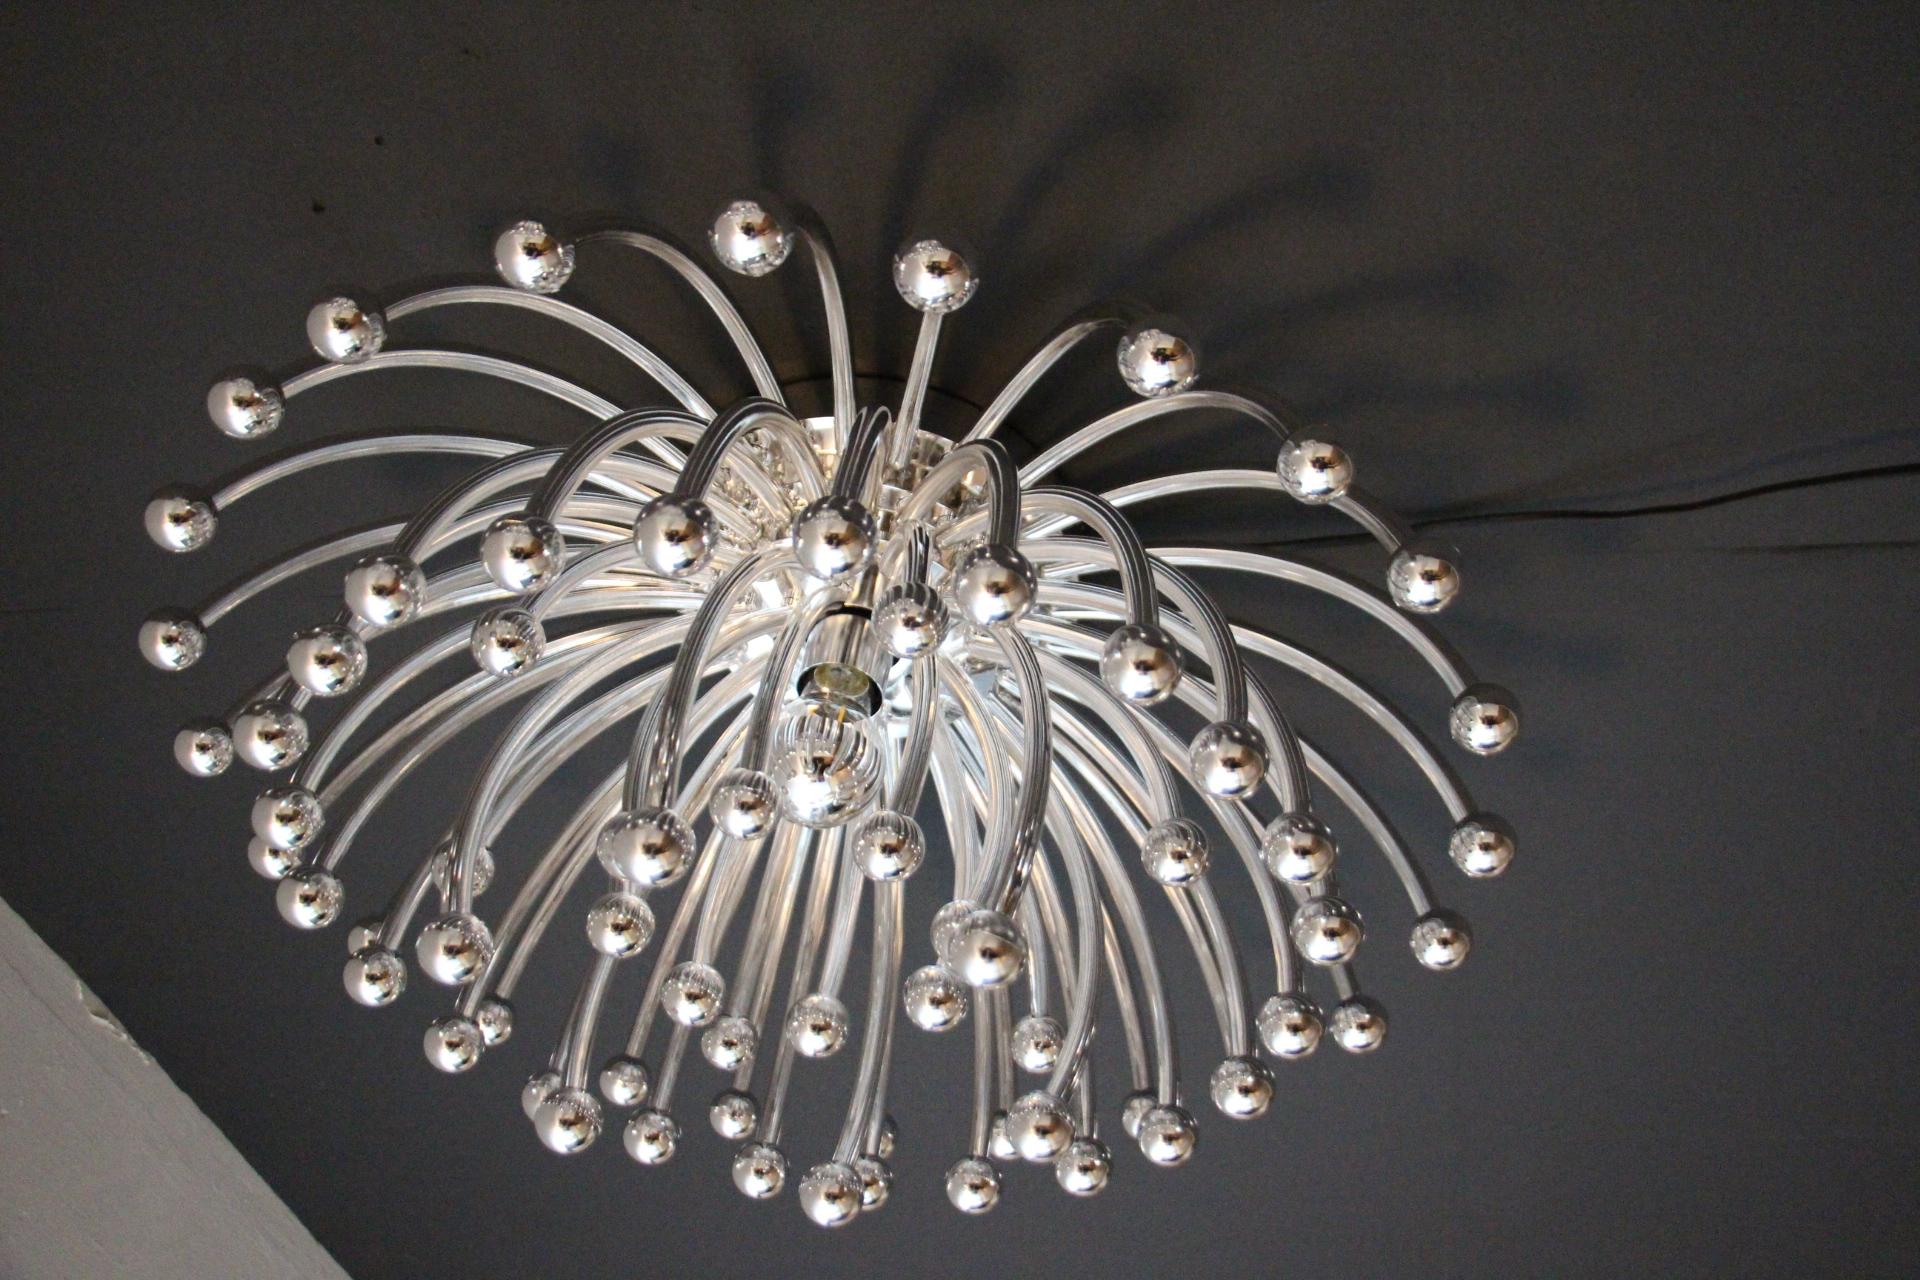 60 cm Silver Pistillo Chandeliers Table Lamps or Wall Lamps By Valenti Milano 7